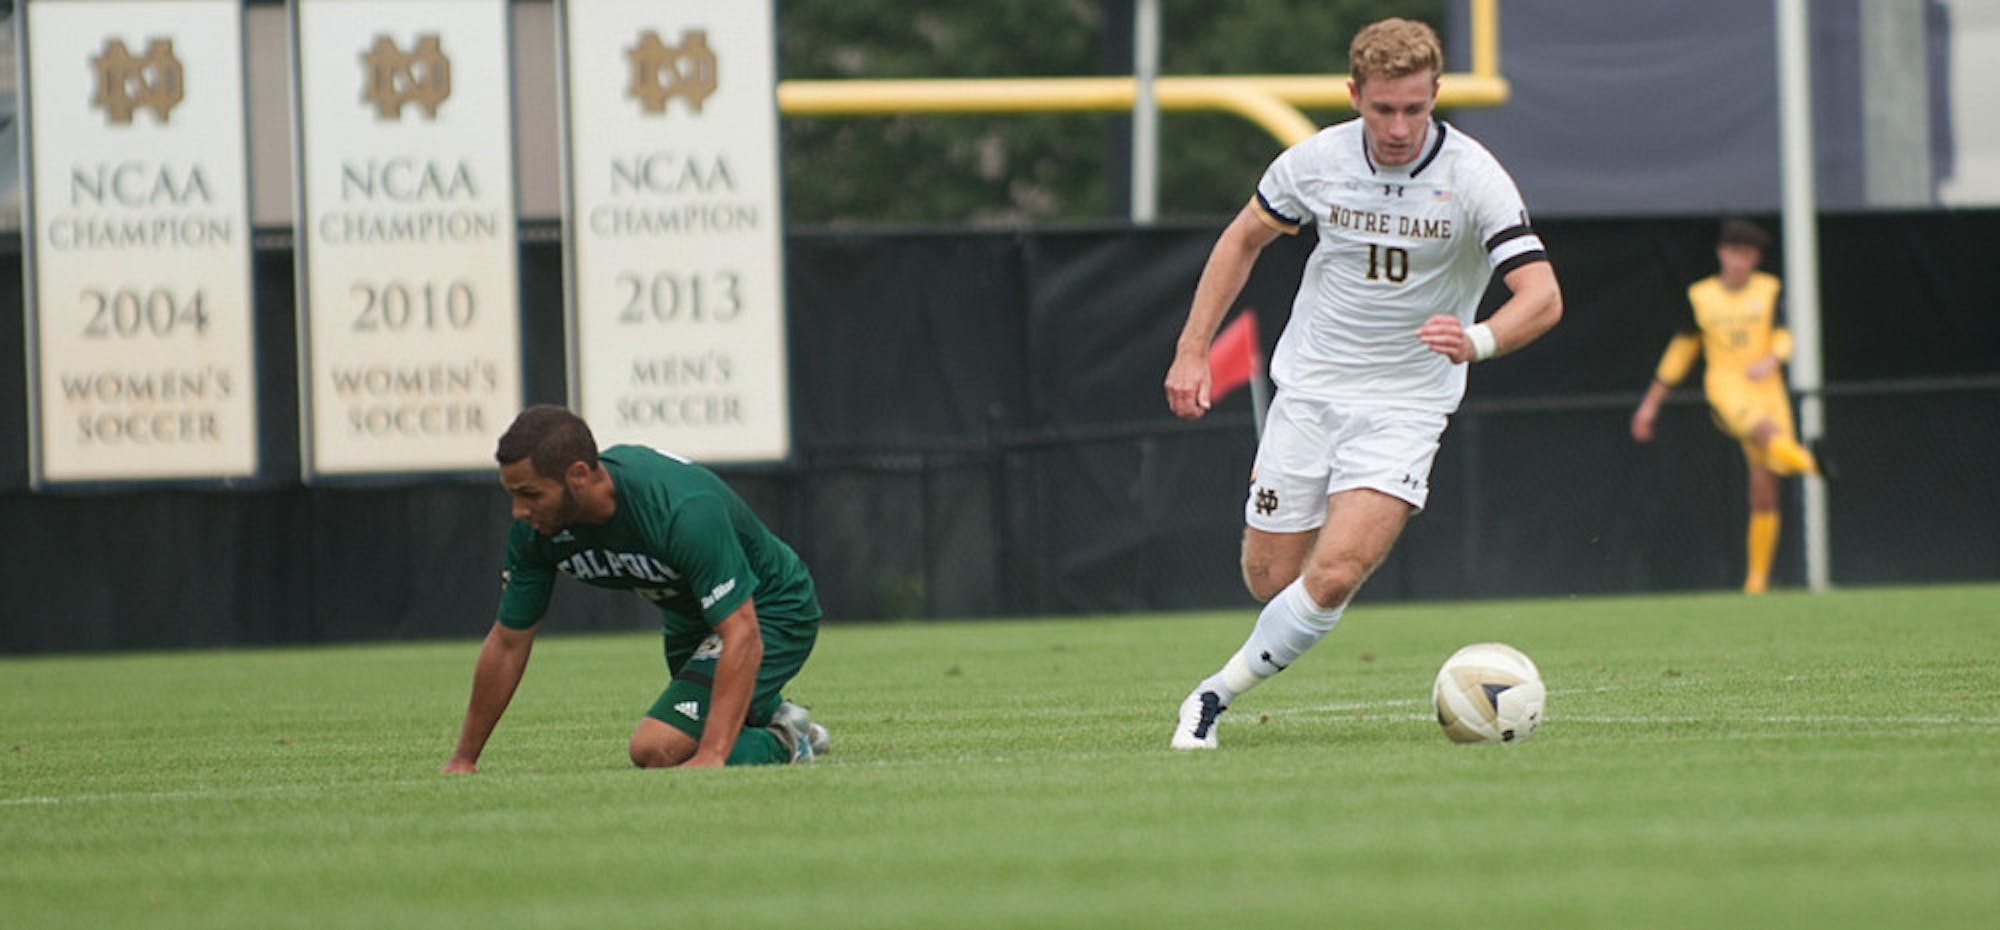 Irish captain and senior forward Jon Gallagher speeds past a fallen defender during Notre Dame’s 2-1 overtime victory over Cal Poly on Sunday at Alumni Stadium. Gallagher leads the team in shots this year.